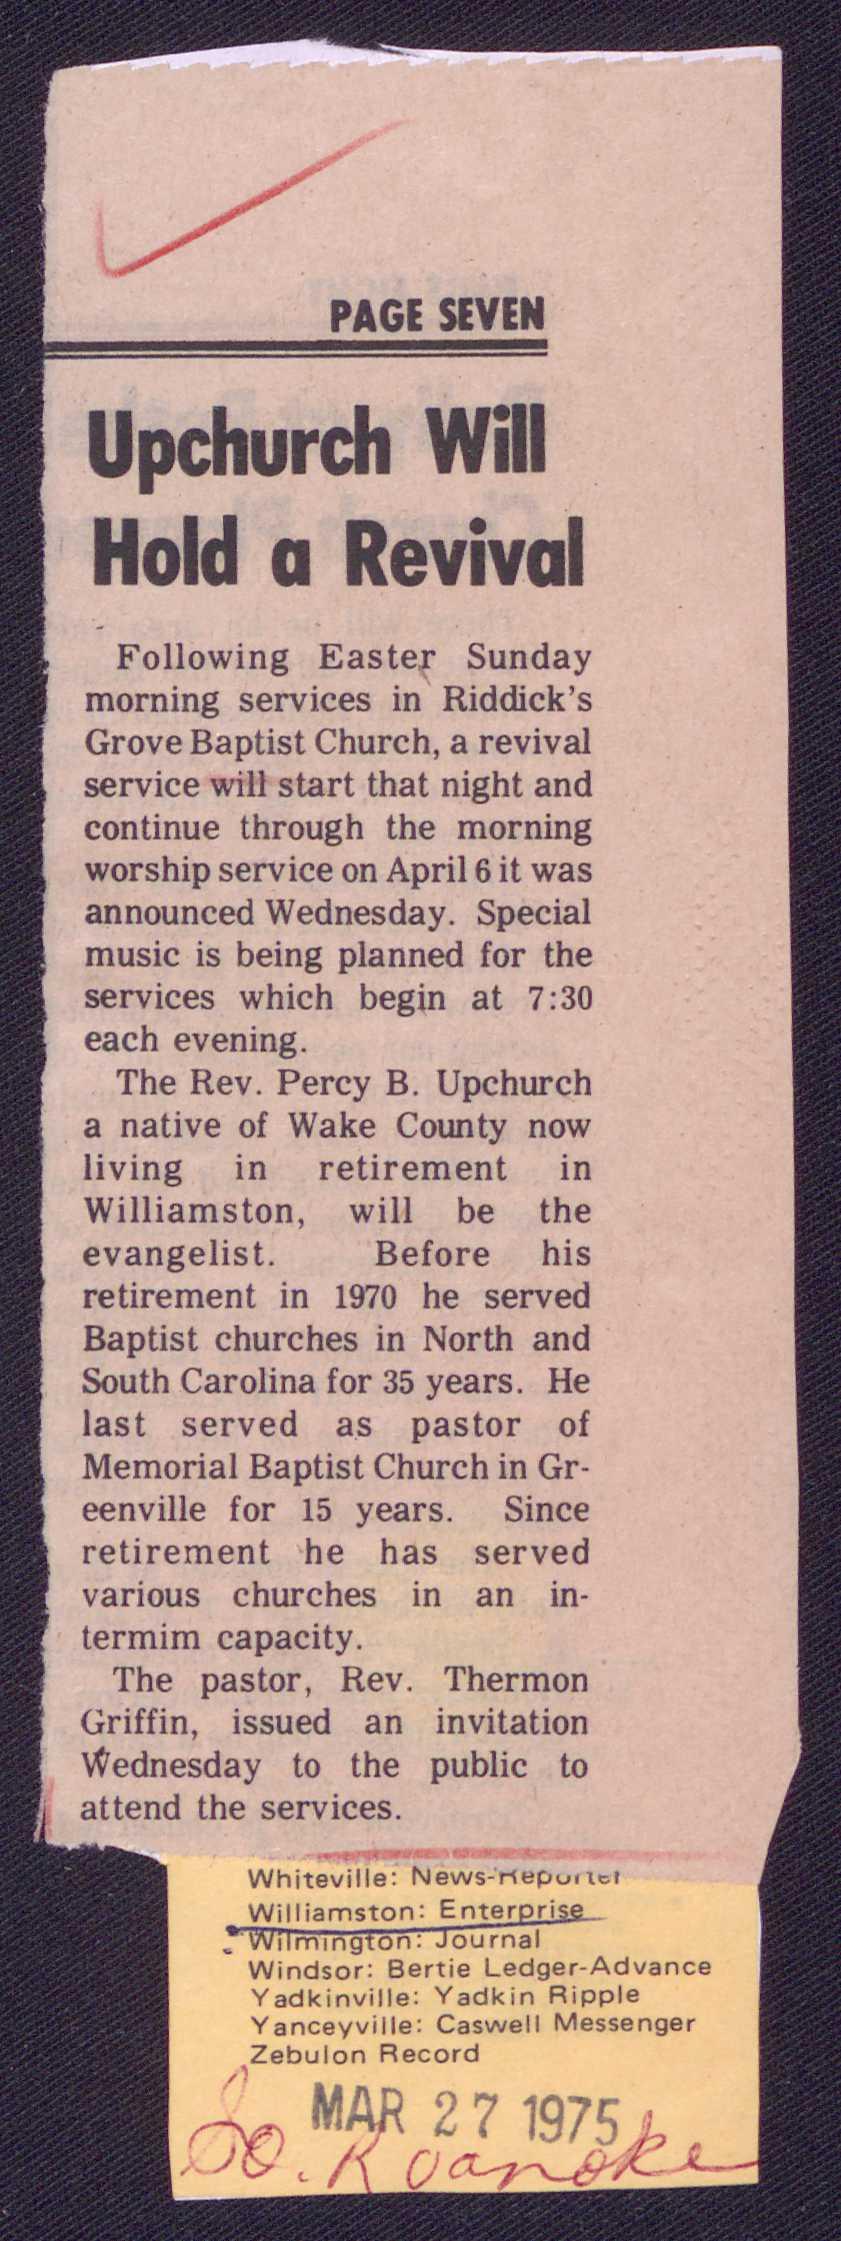 PAGE SEVEN Upchurch Will Hold a Revival Following Easte{ Sunday morning services in Riddick's Grove Baptist Church, a revival service will start that night and continue through the morning worship